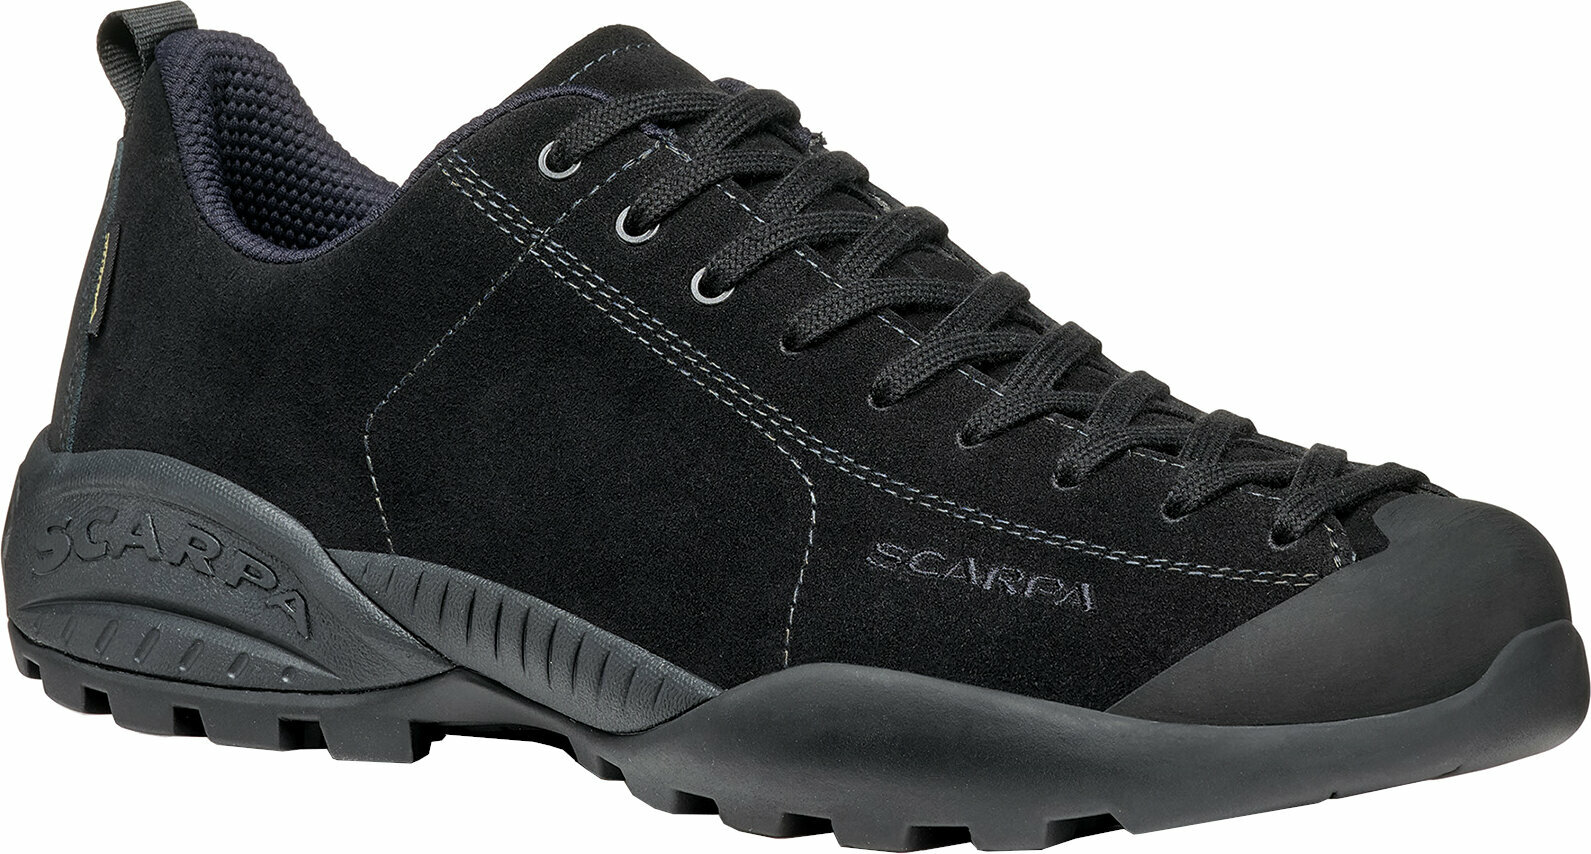 Chaussures outdoor hommes Scarpa Mojito GTX Black 43,5 Chaussures outdoor hommes